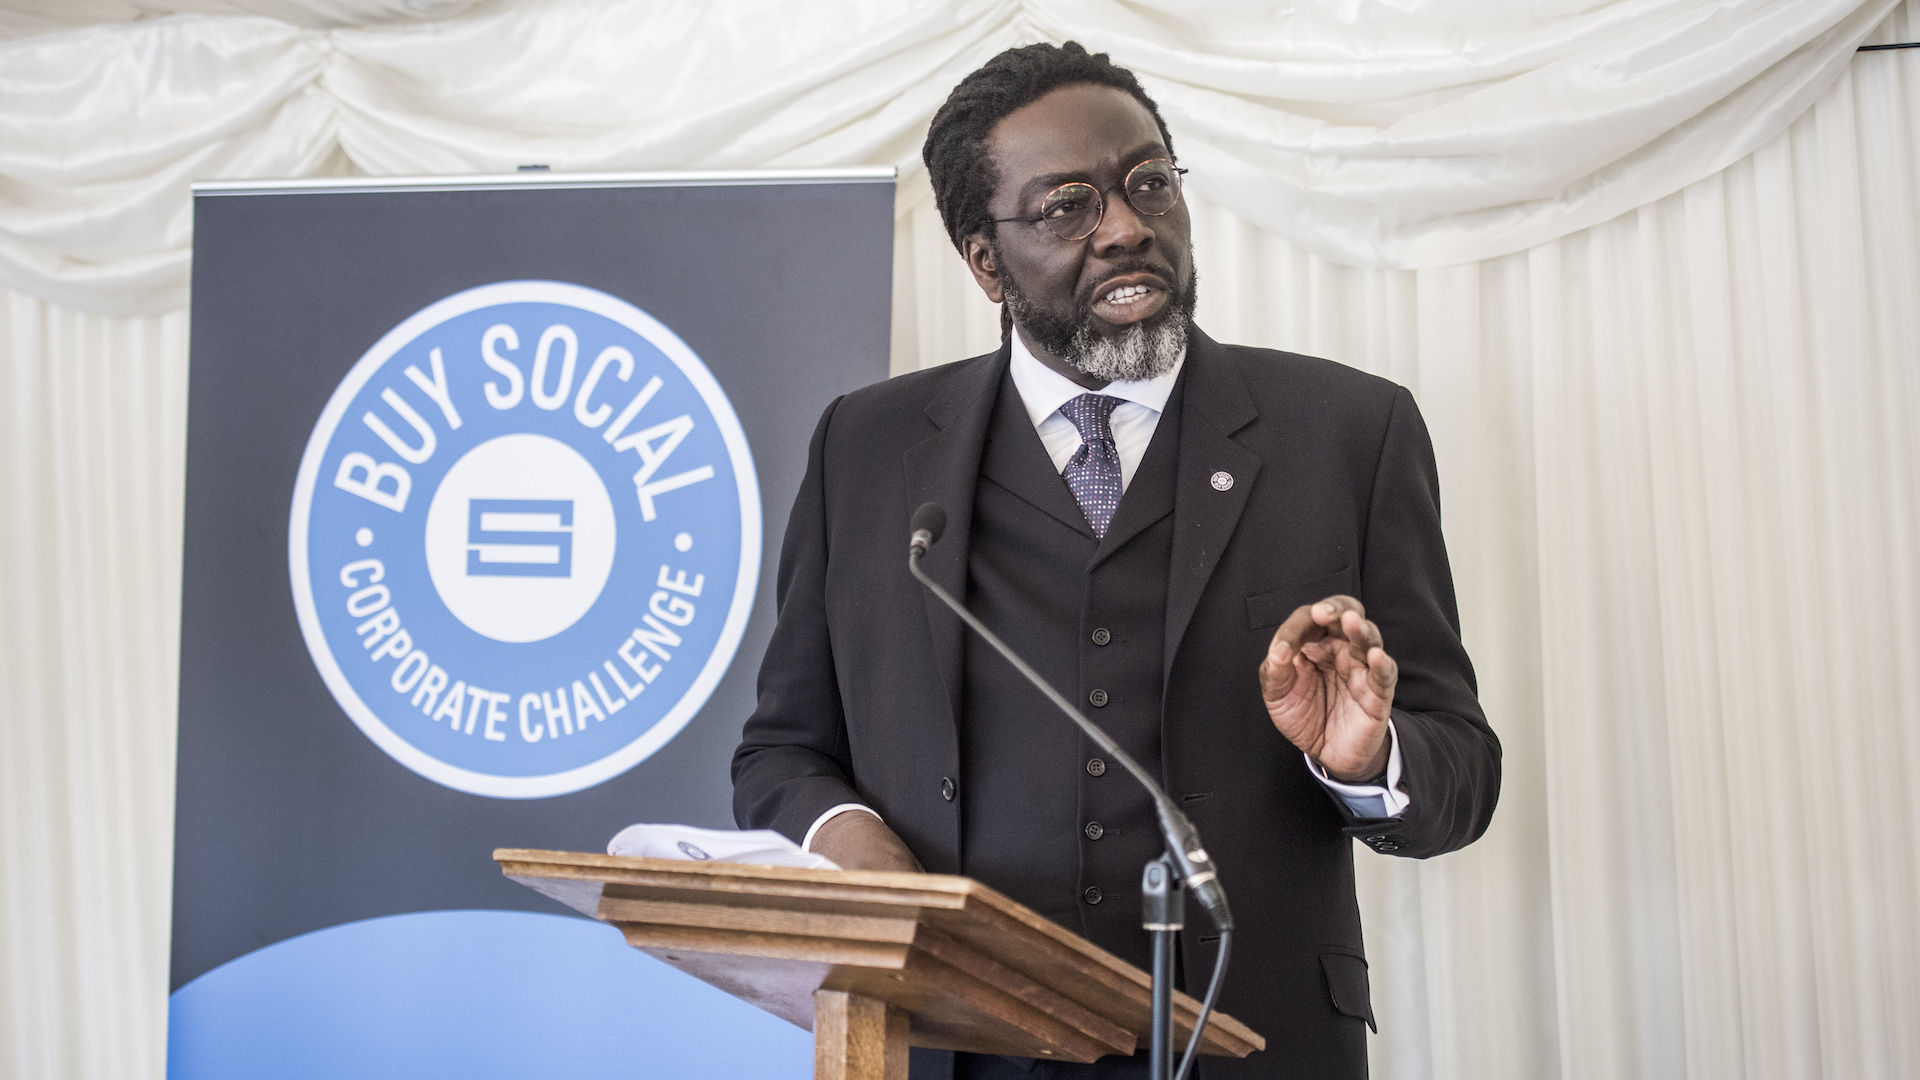 Lord Victor Adebowale at Corporate Challenge Year 1 impact event.